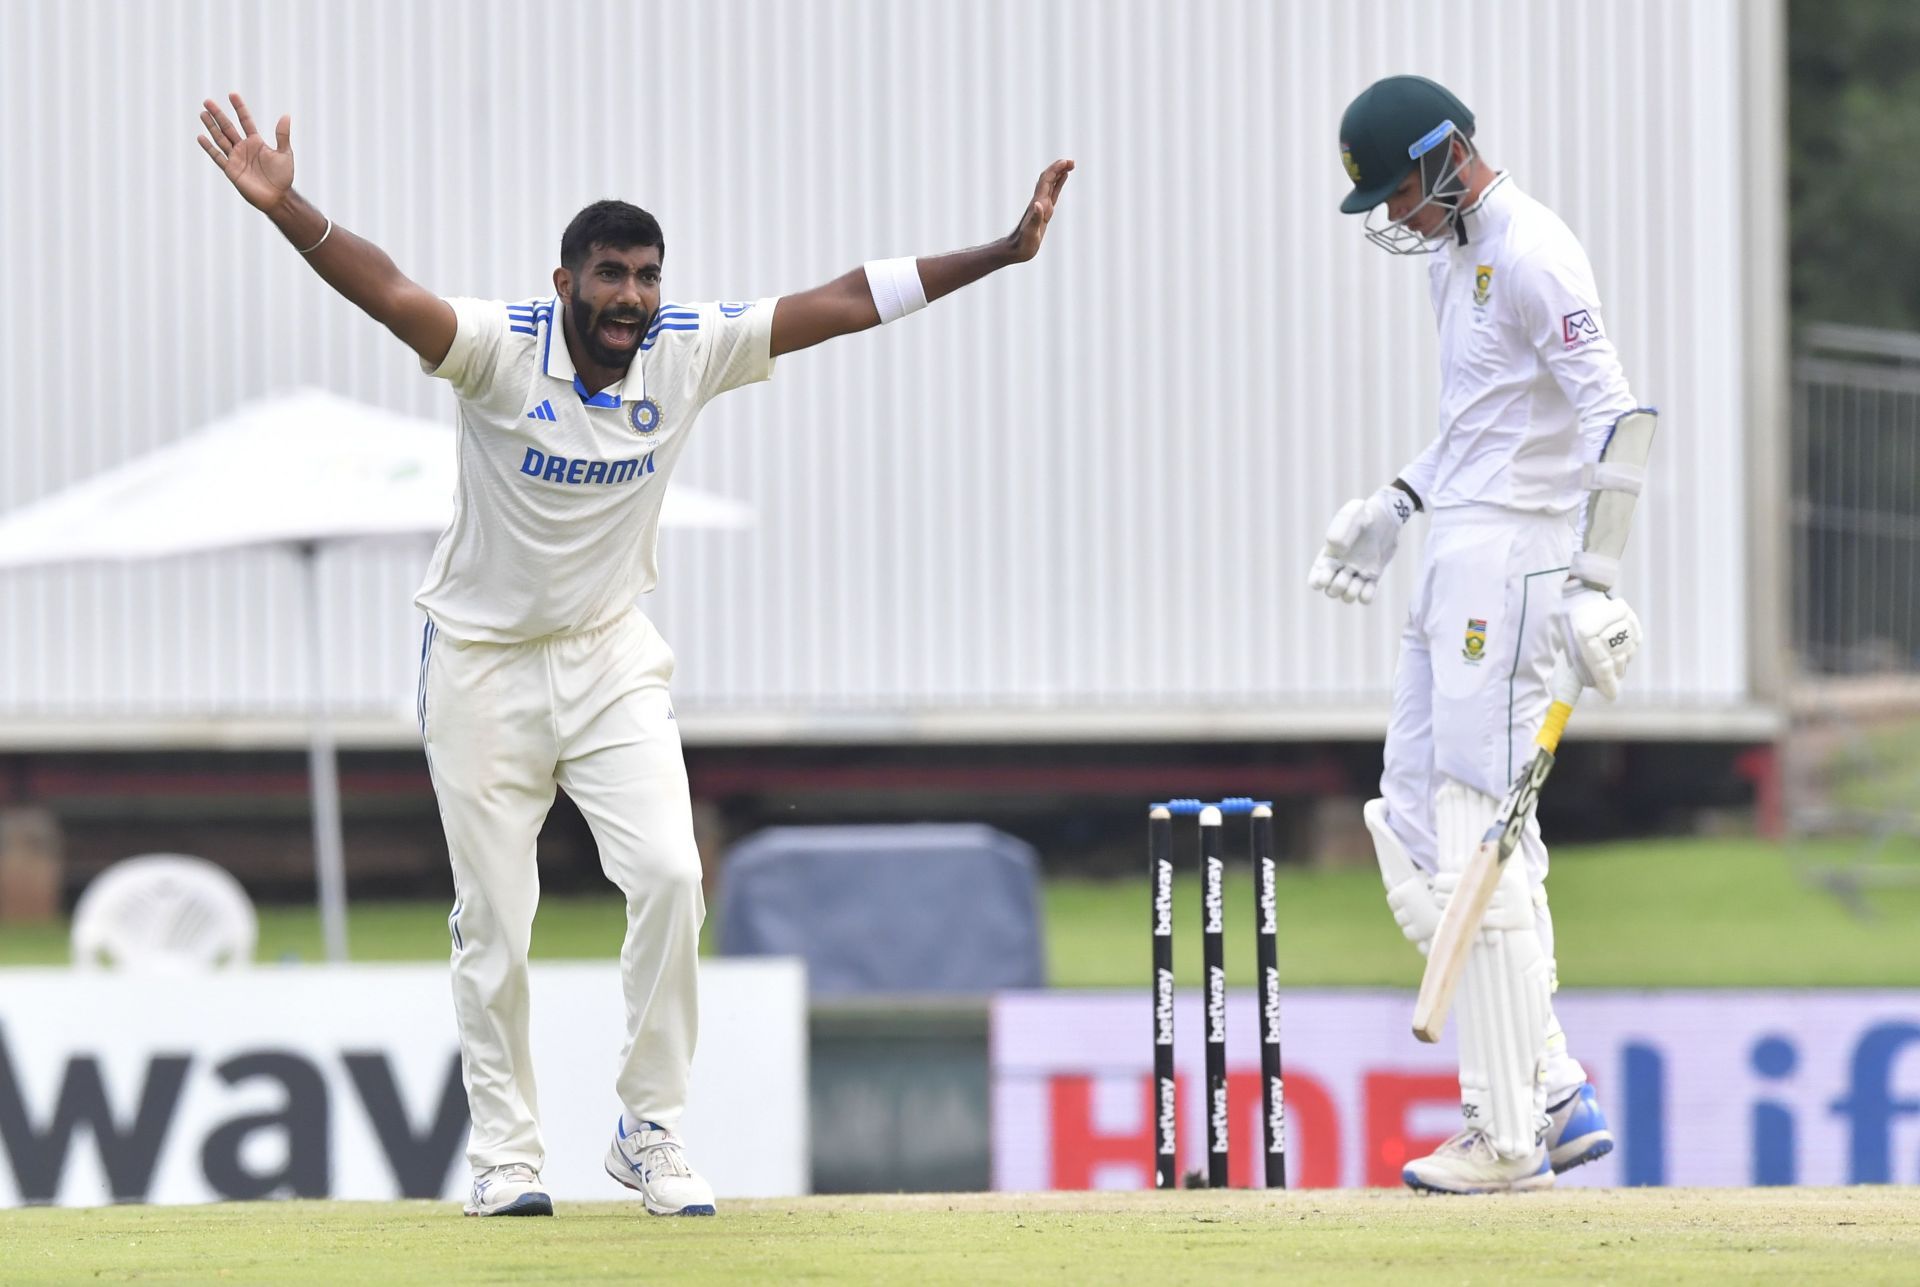 Jasprit Bumrah has picked up seven wickets in the series so far.